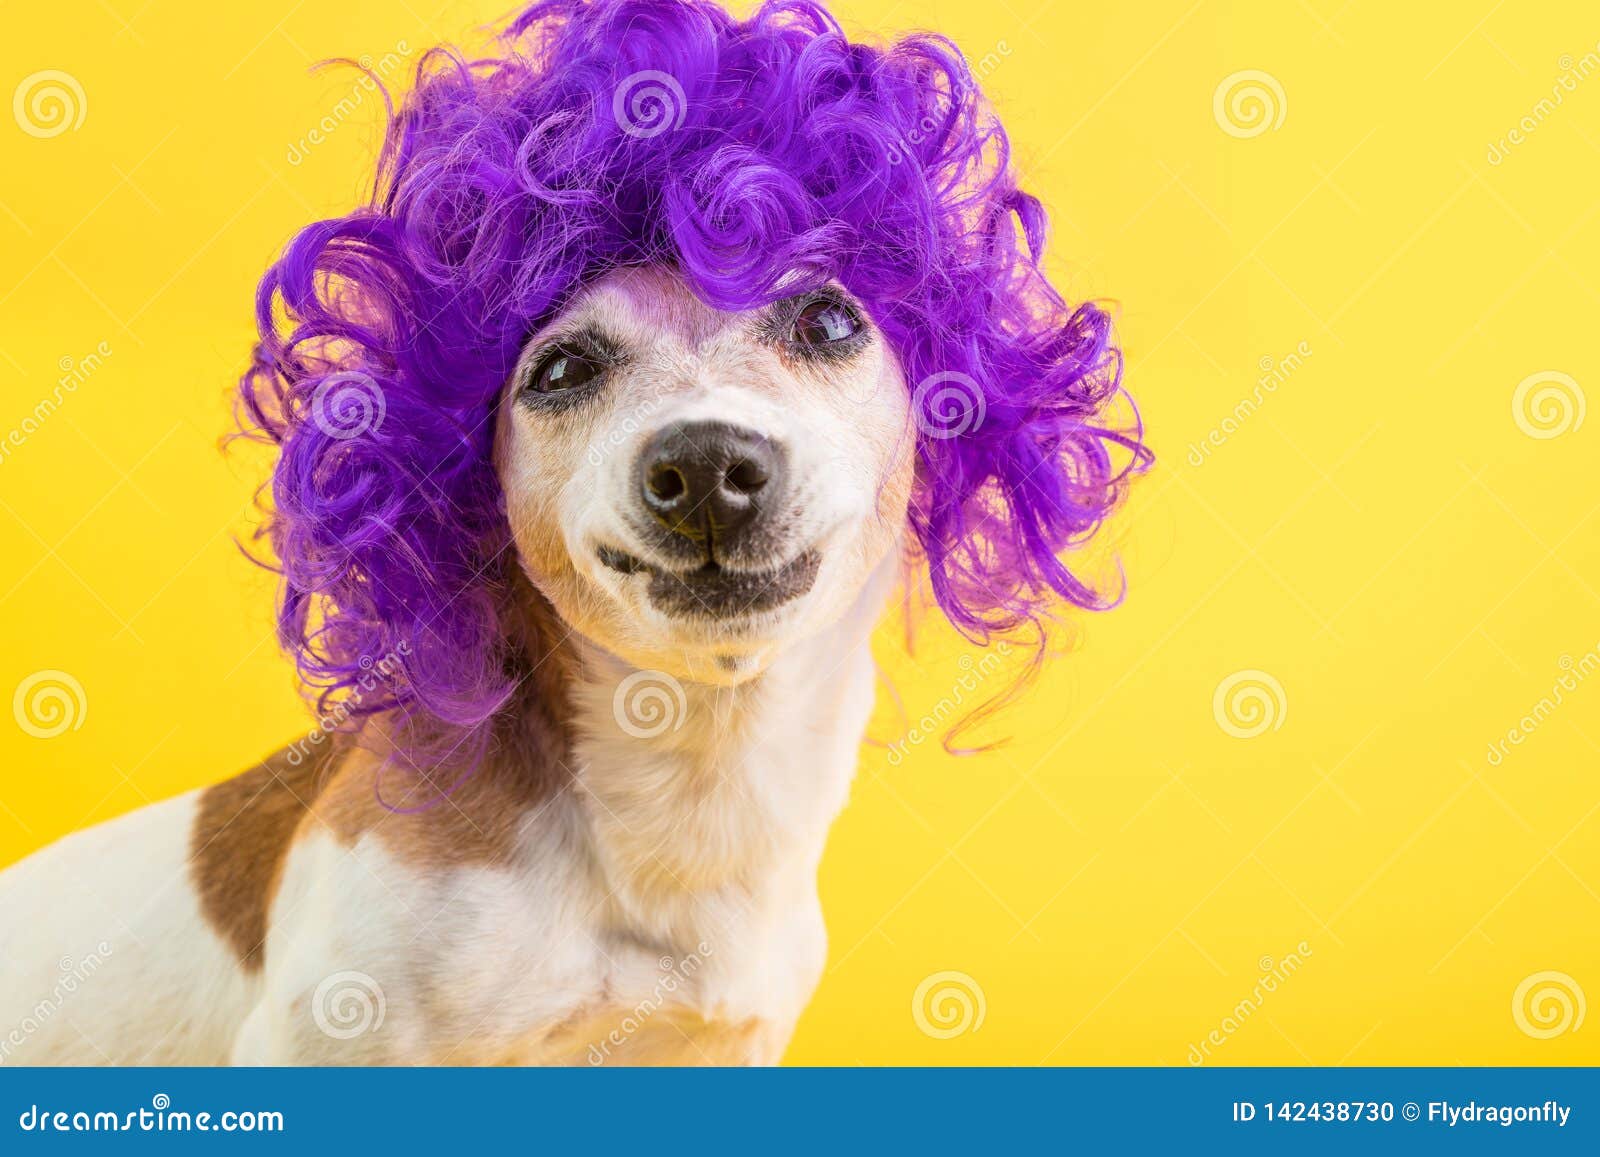 confused dog face. weird funny smile. curly lilac wig yellow background